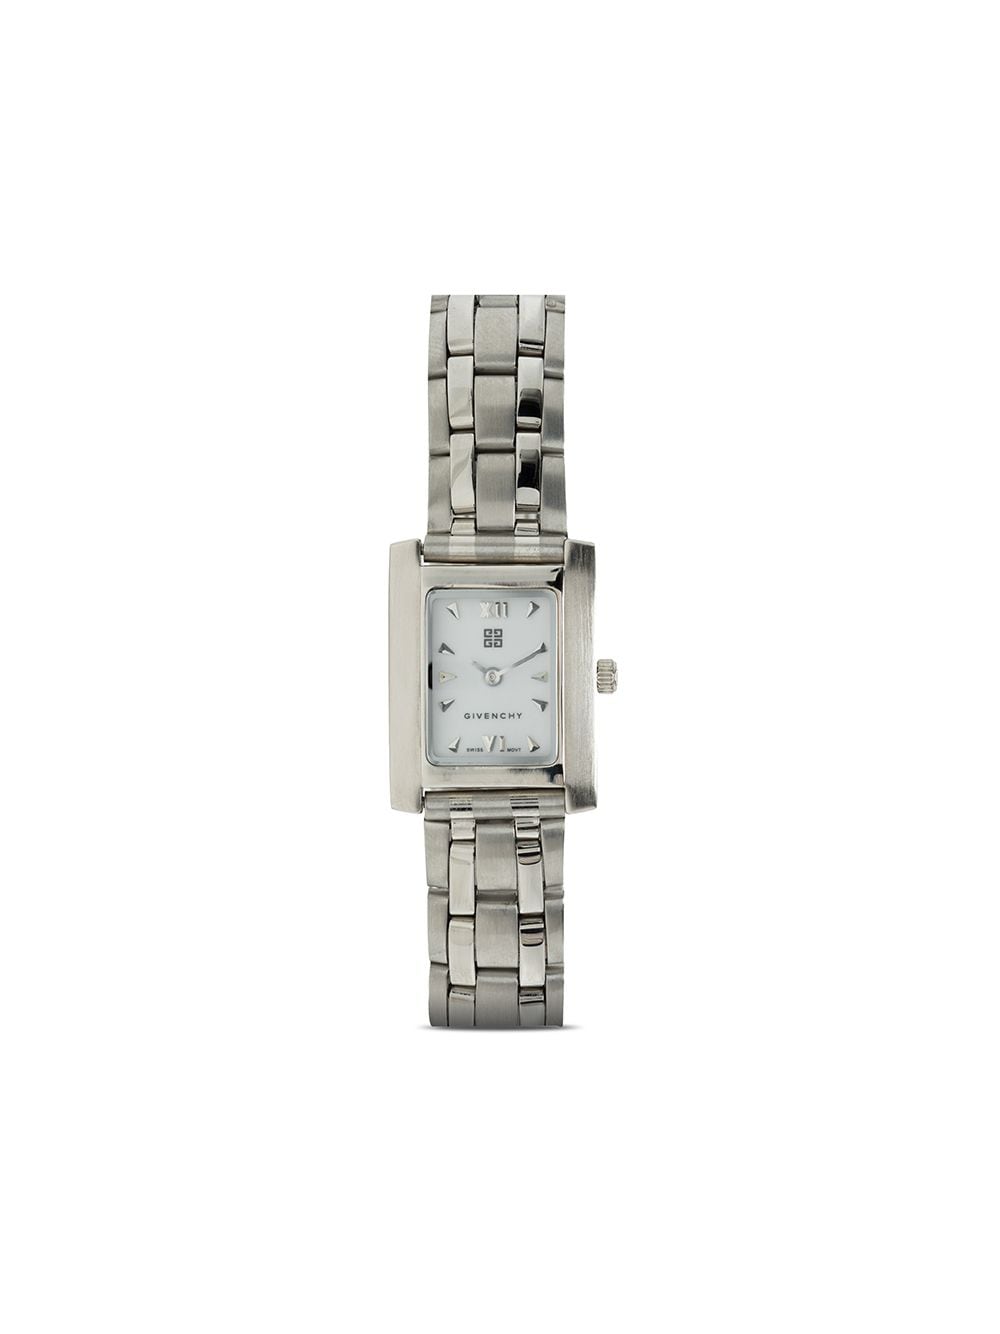 Pre-owned Givenchy Square Face Quartz Watch In Silver